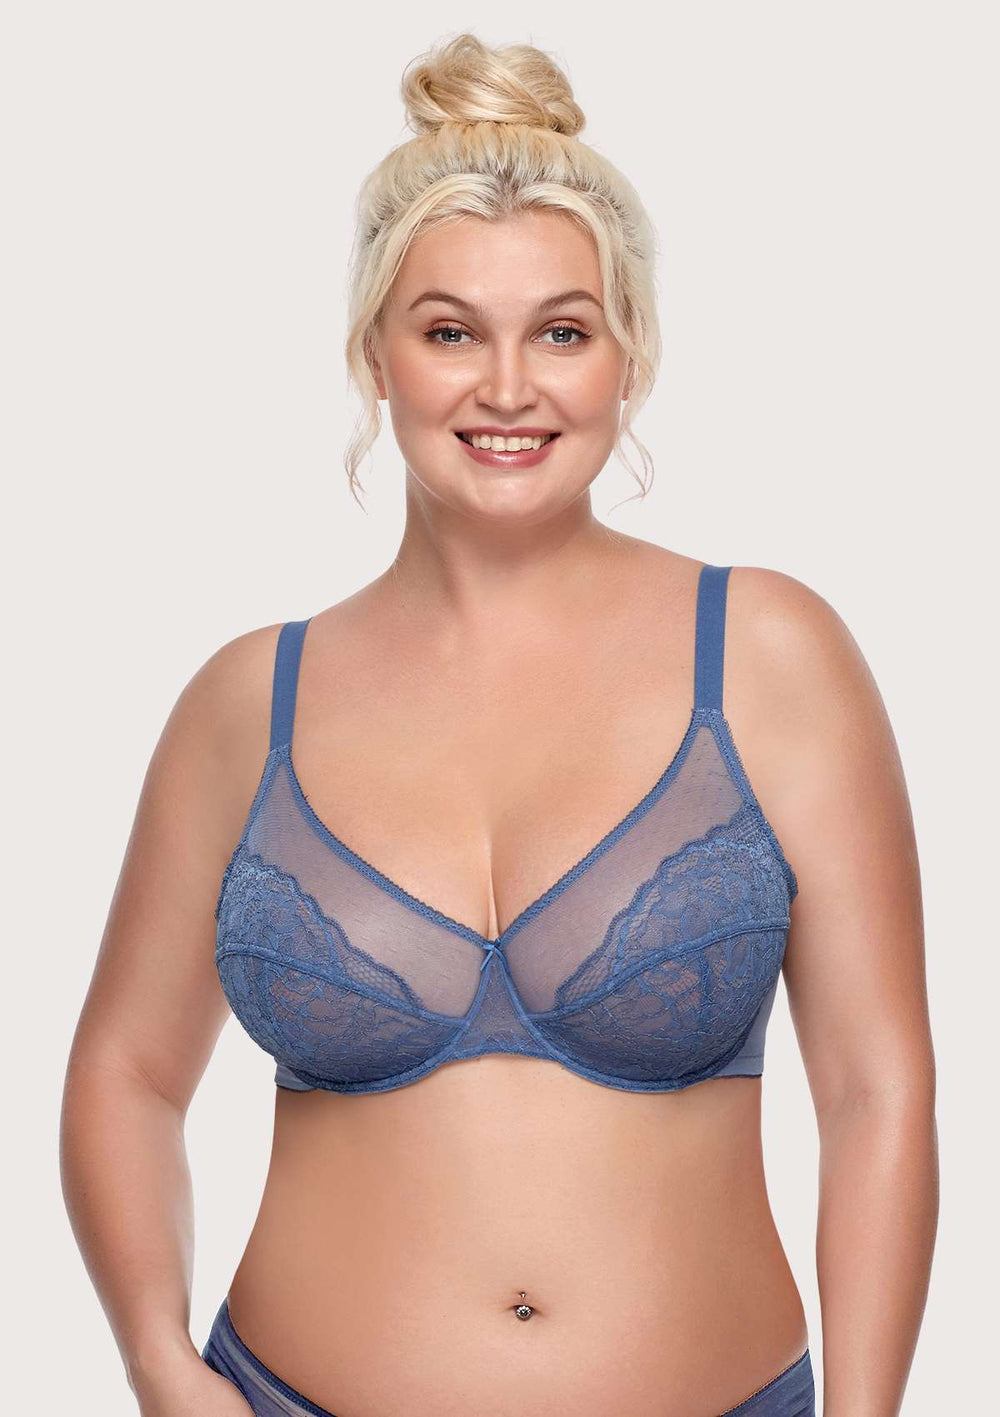 Iheyi 6 Pieces Plus Size Wired Full Cup Lace Plain Light Padded D/DD/DDD Bra  (38D) 